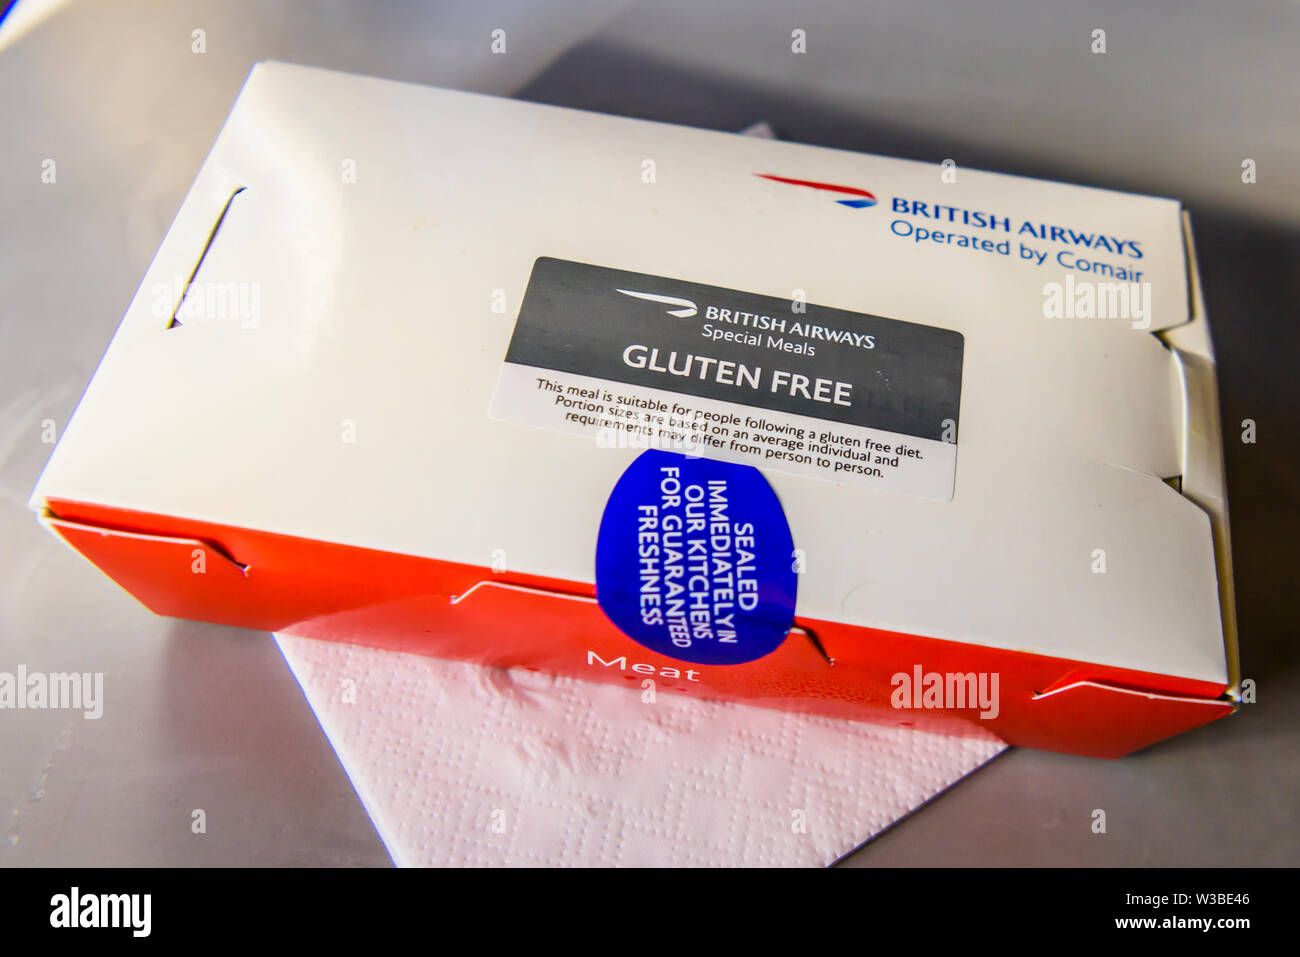 British Airways (operated by Comair) Gluten Free meal box Stock Photo